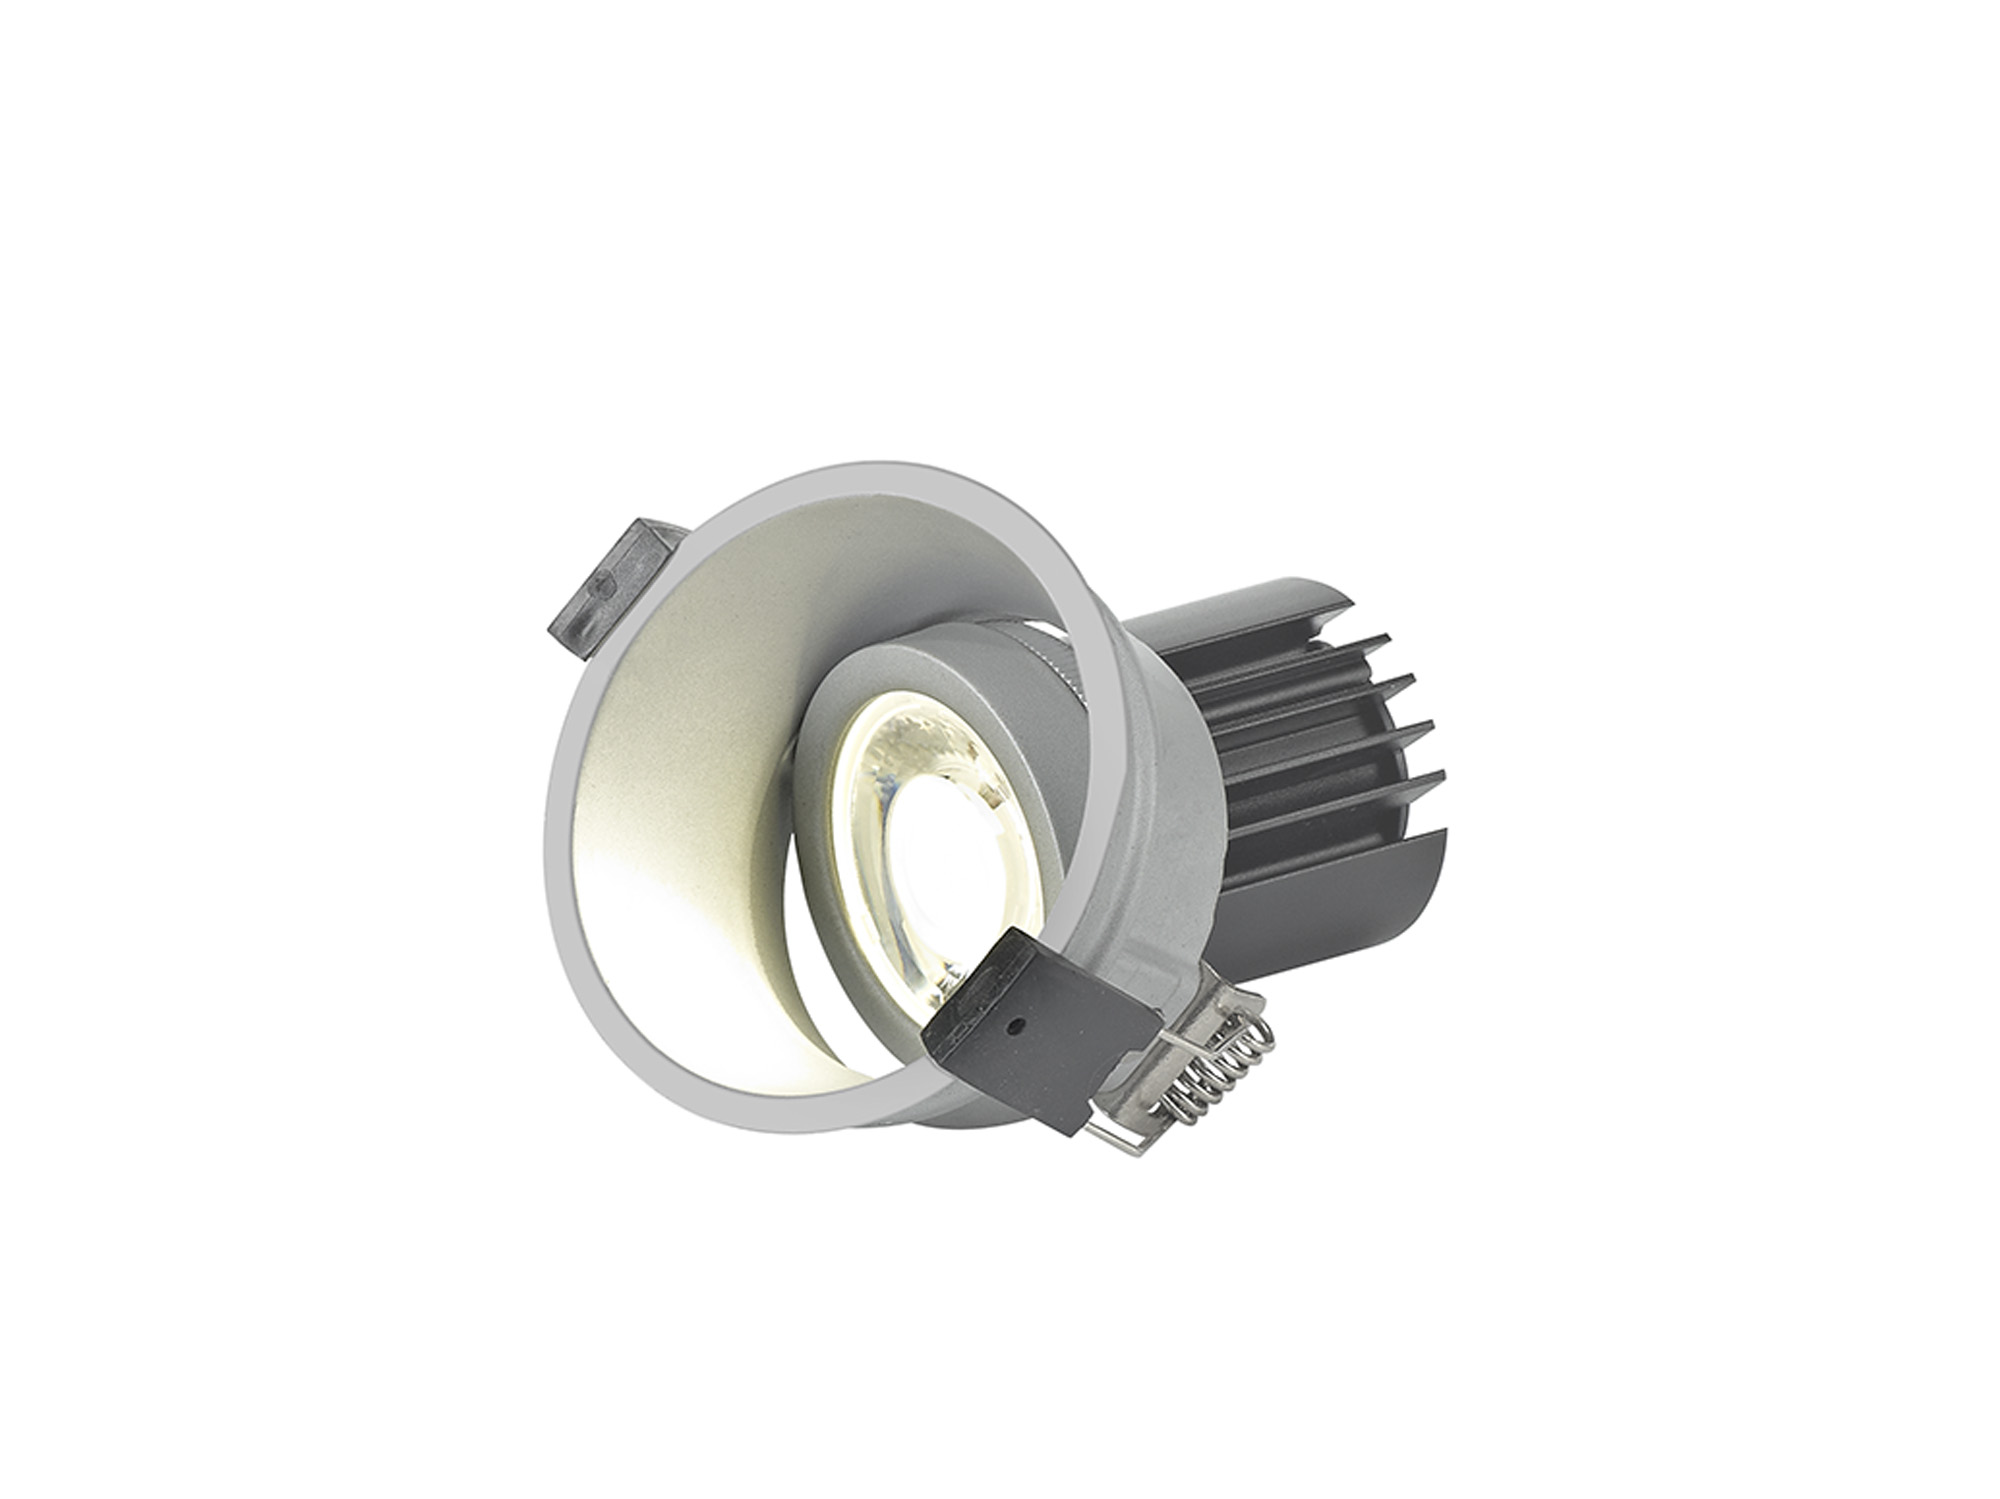 DM201664  Bania A 9 Powered by Tridonic  9W 2700K 770lm 24° CRI>90 LED Engine; 250mA Silver Adjustable Recessed Spotlight; IP20